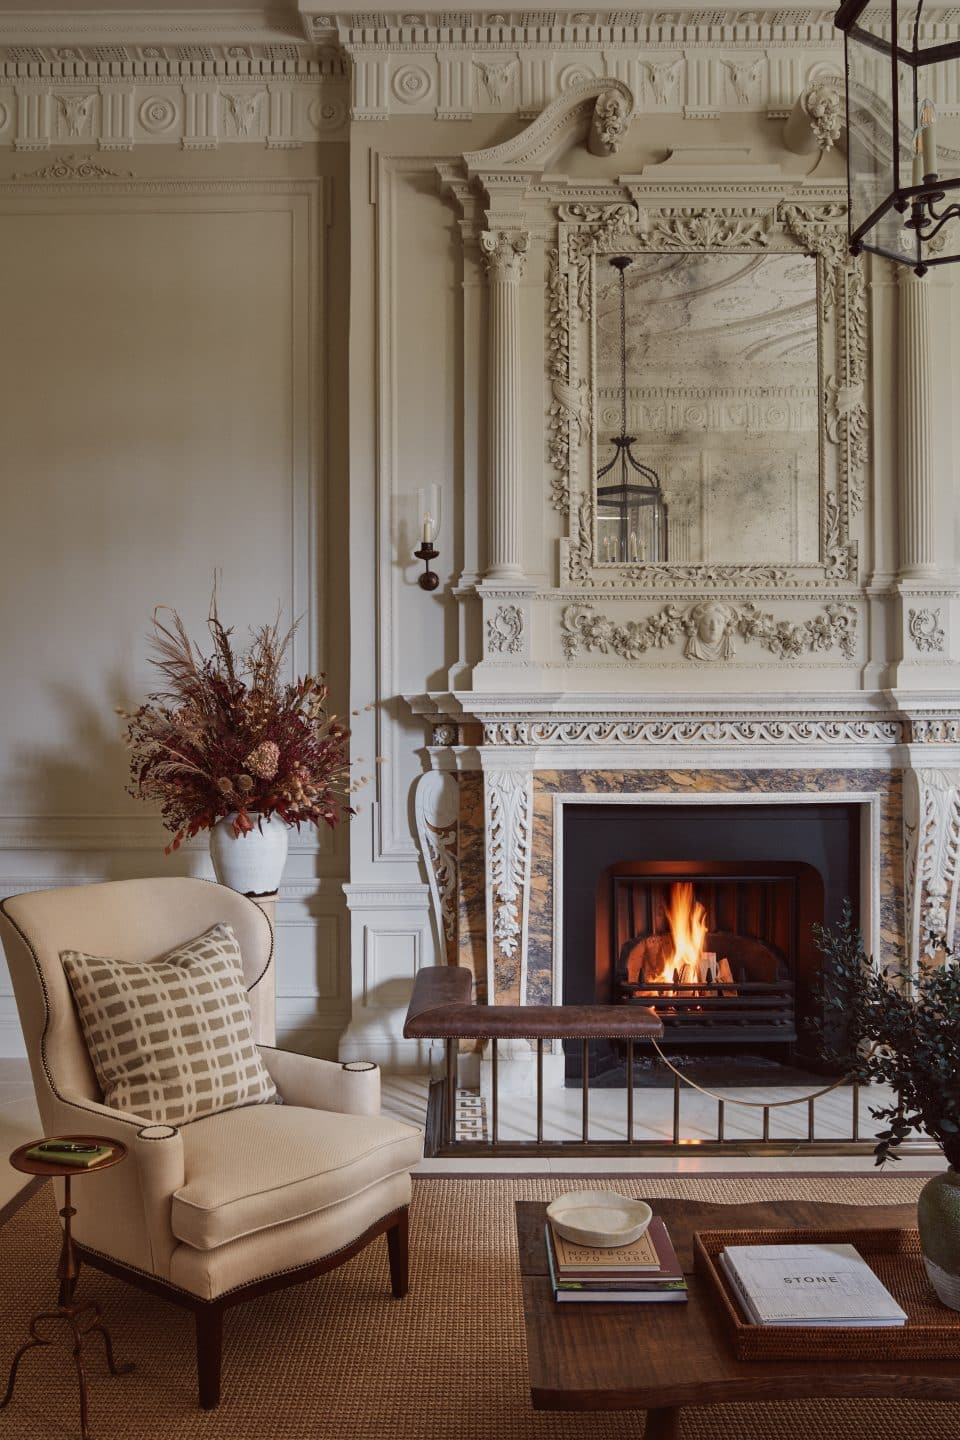 London Design Firm Albion Nord Bravely Transformed an 18th-Century Neoclassical Manor